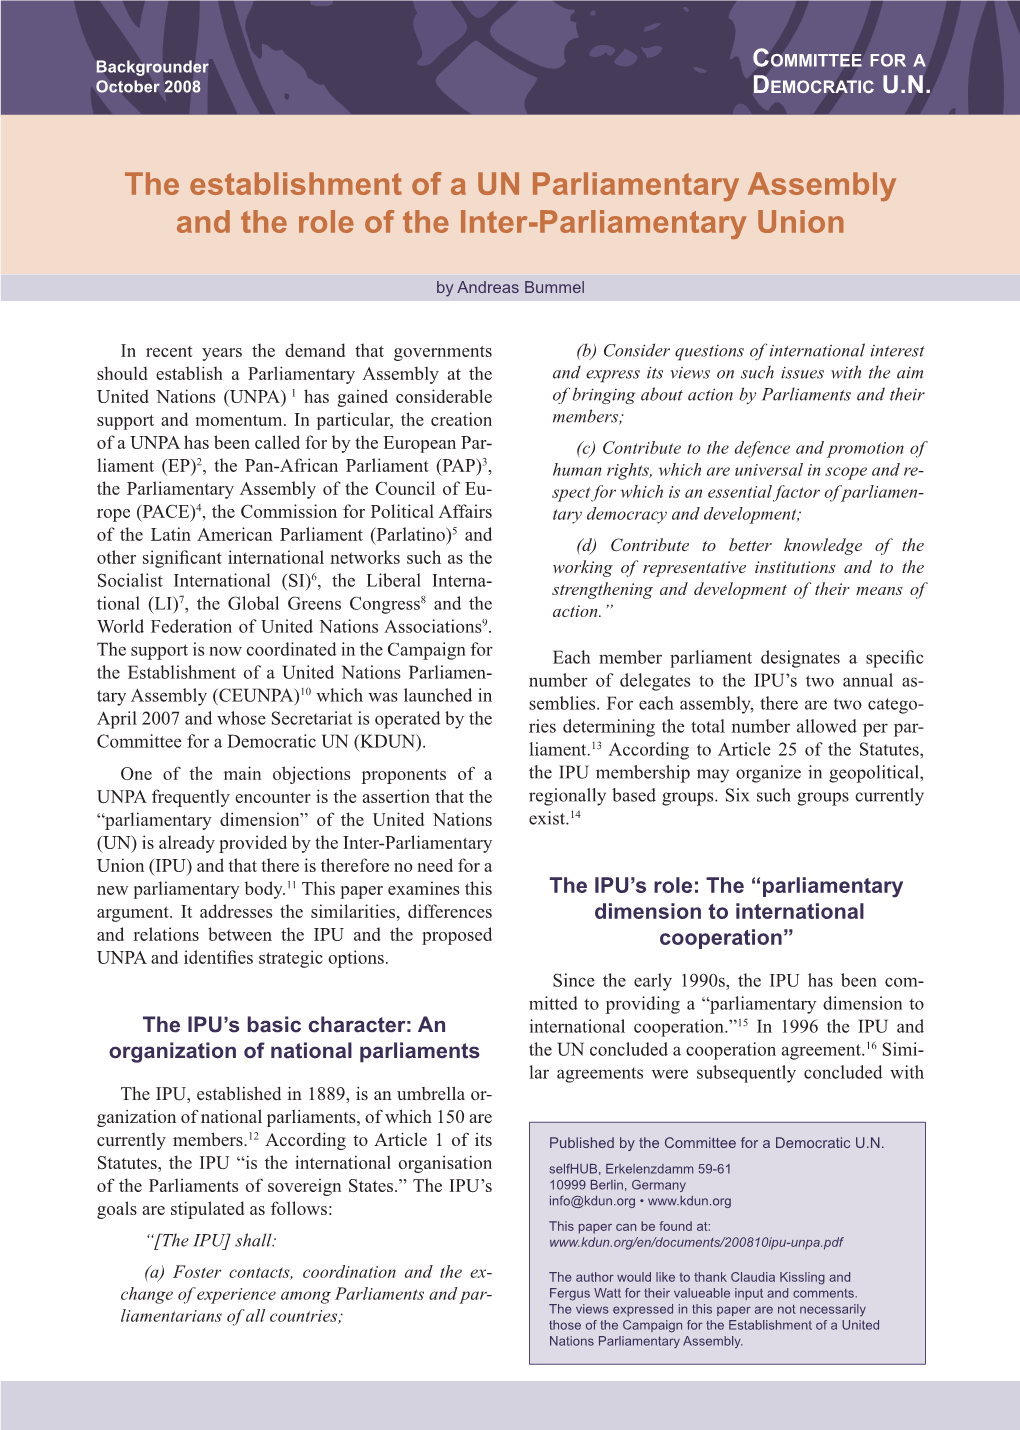 The Establishment of a UN Parliamentary Assembly and the Role of the Inter-Parliamentary Union